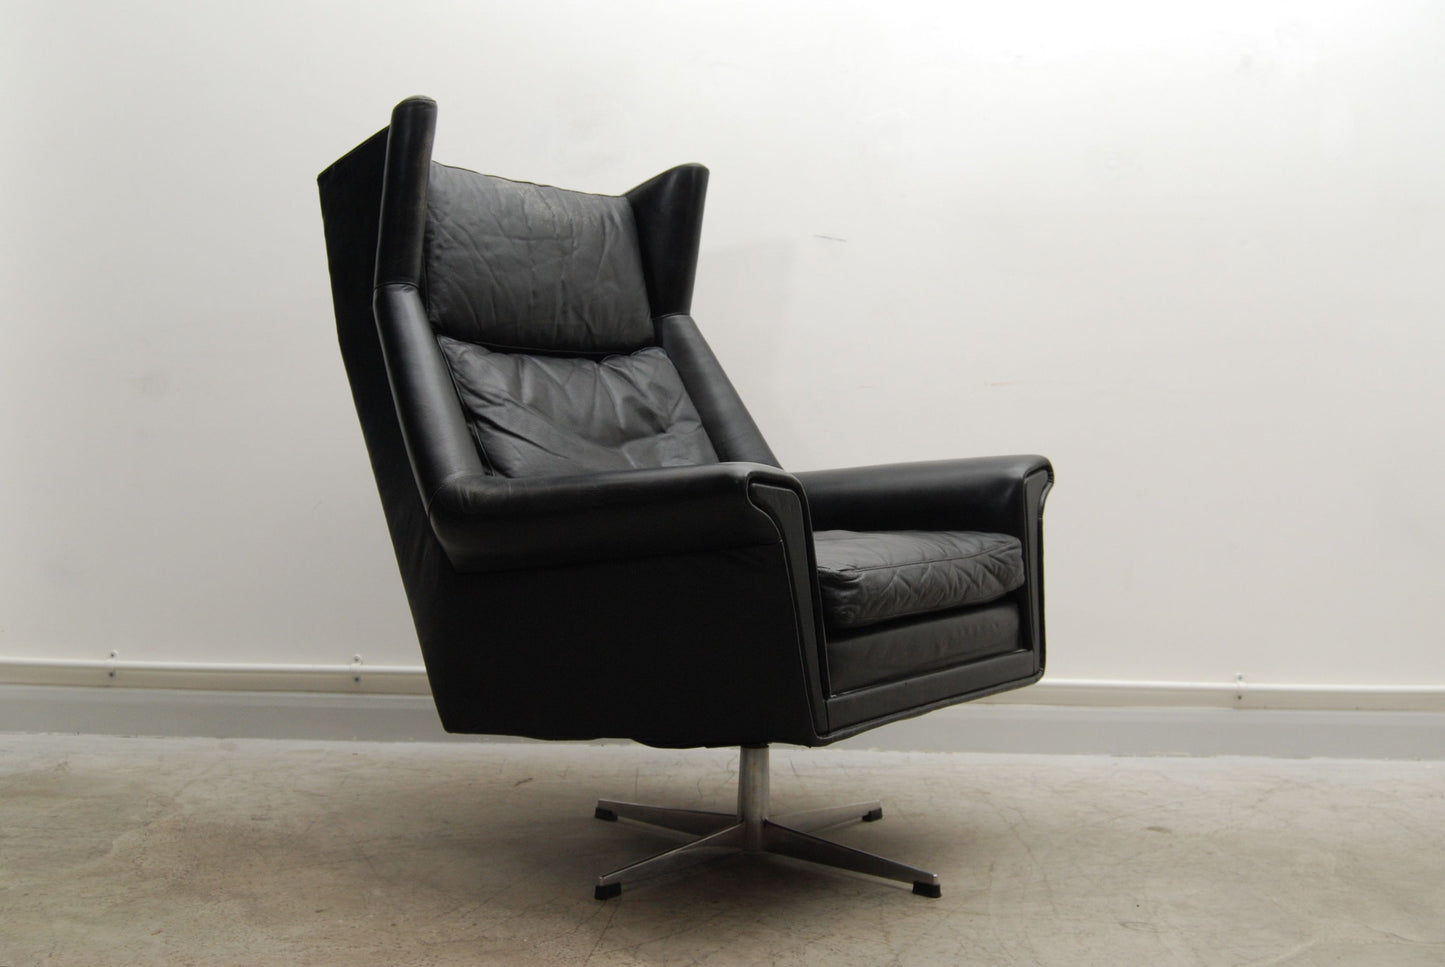 Highback lounge chair with winged headrest